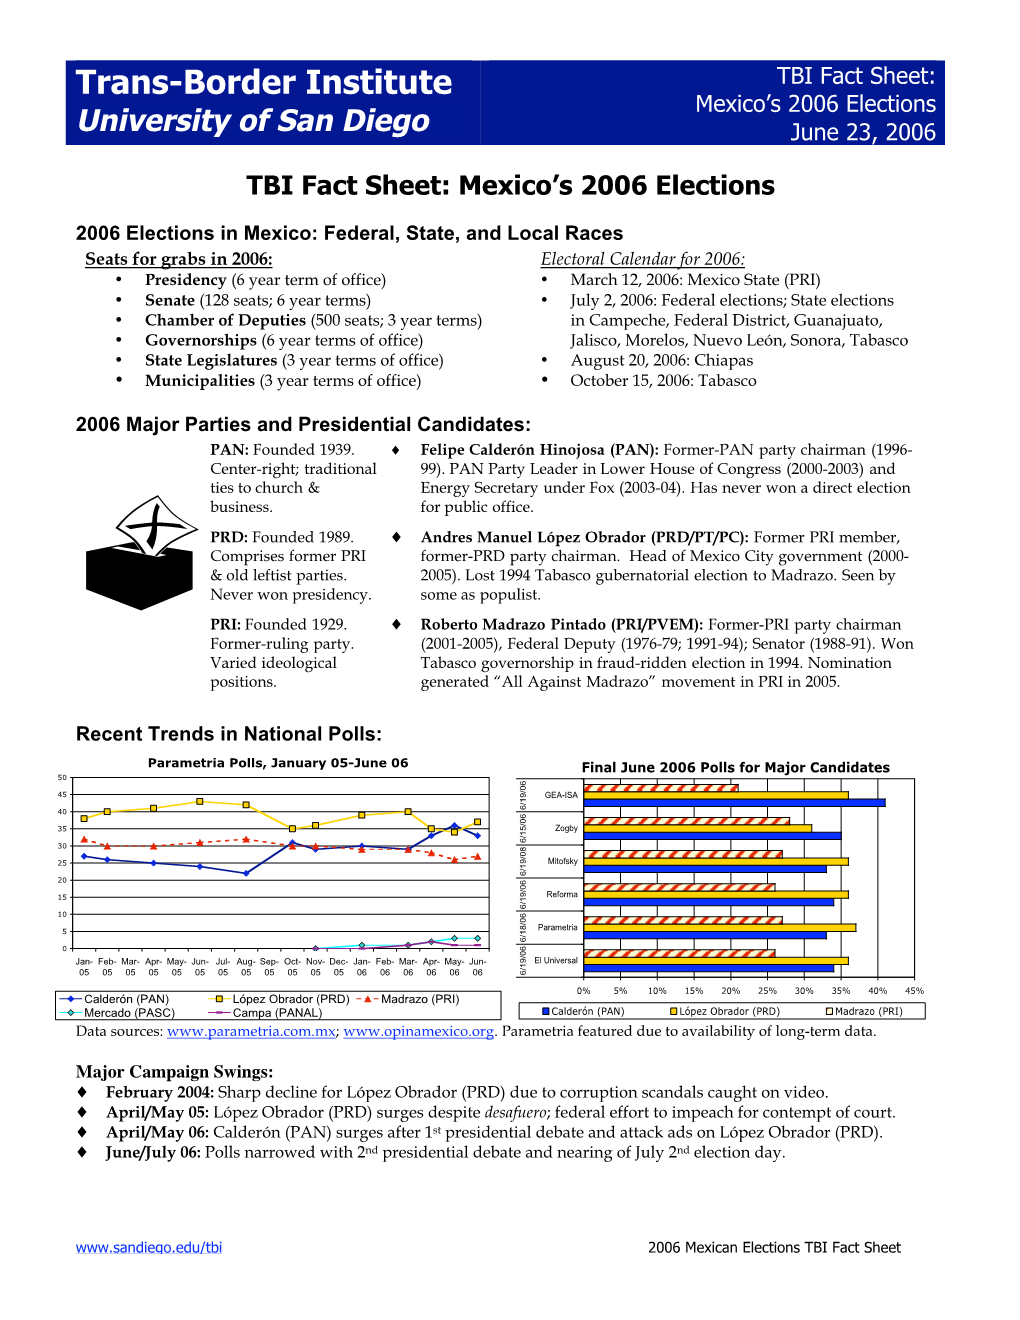 Trans-Border Institute TBI Fact Sheet: Mexico’S 2006 Elections University of San Diego June 23, 2006